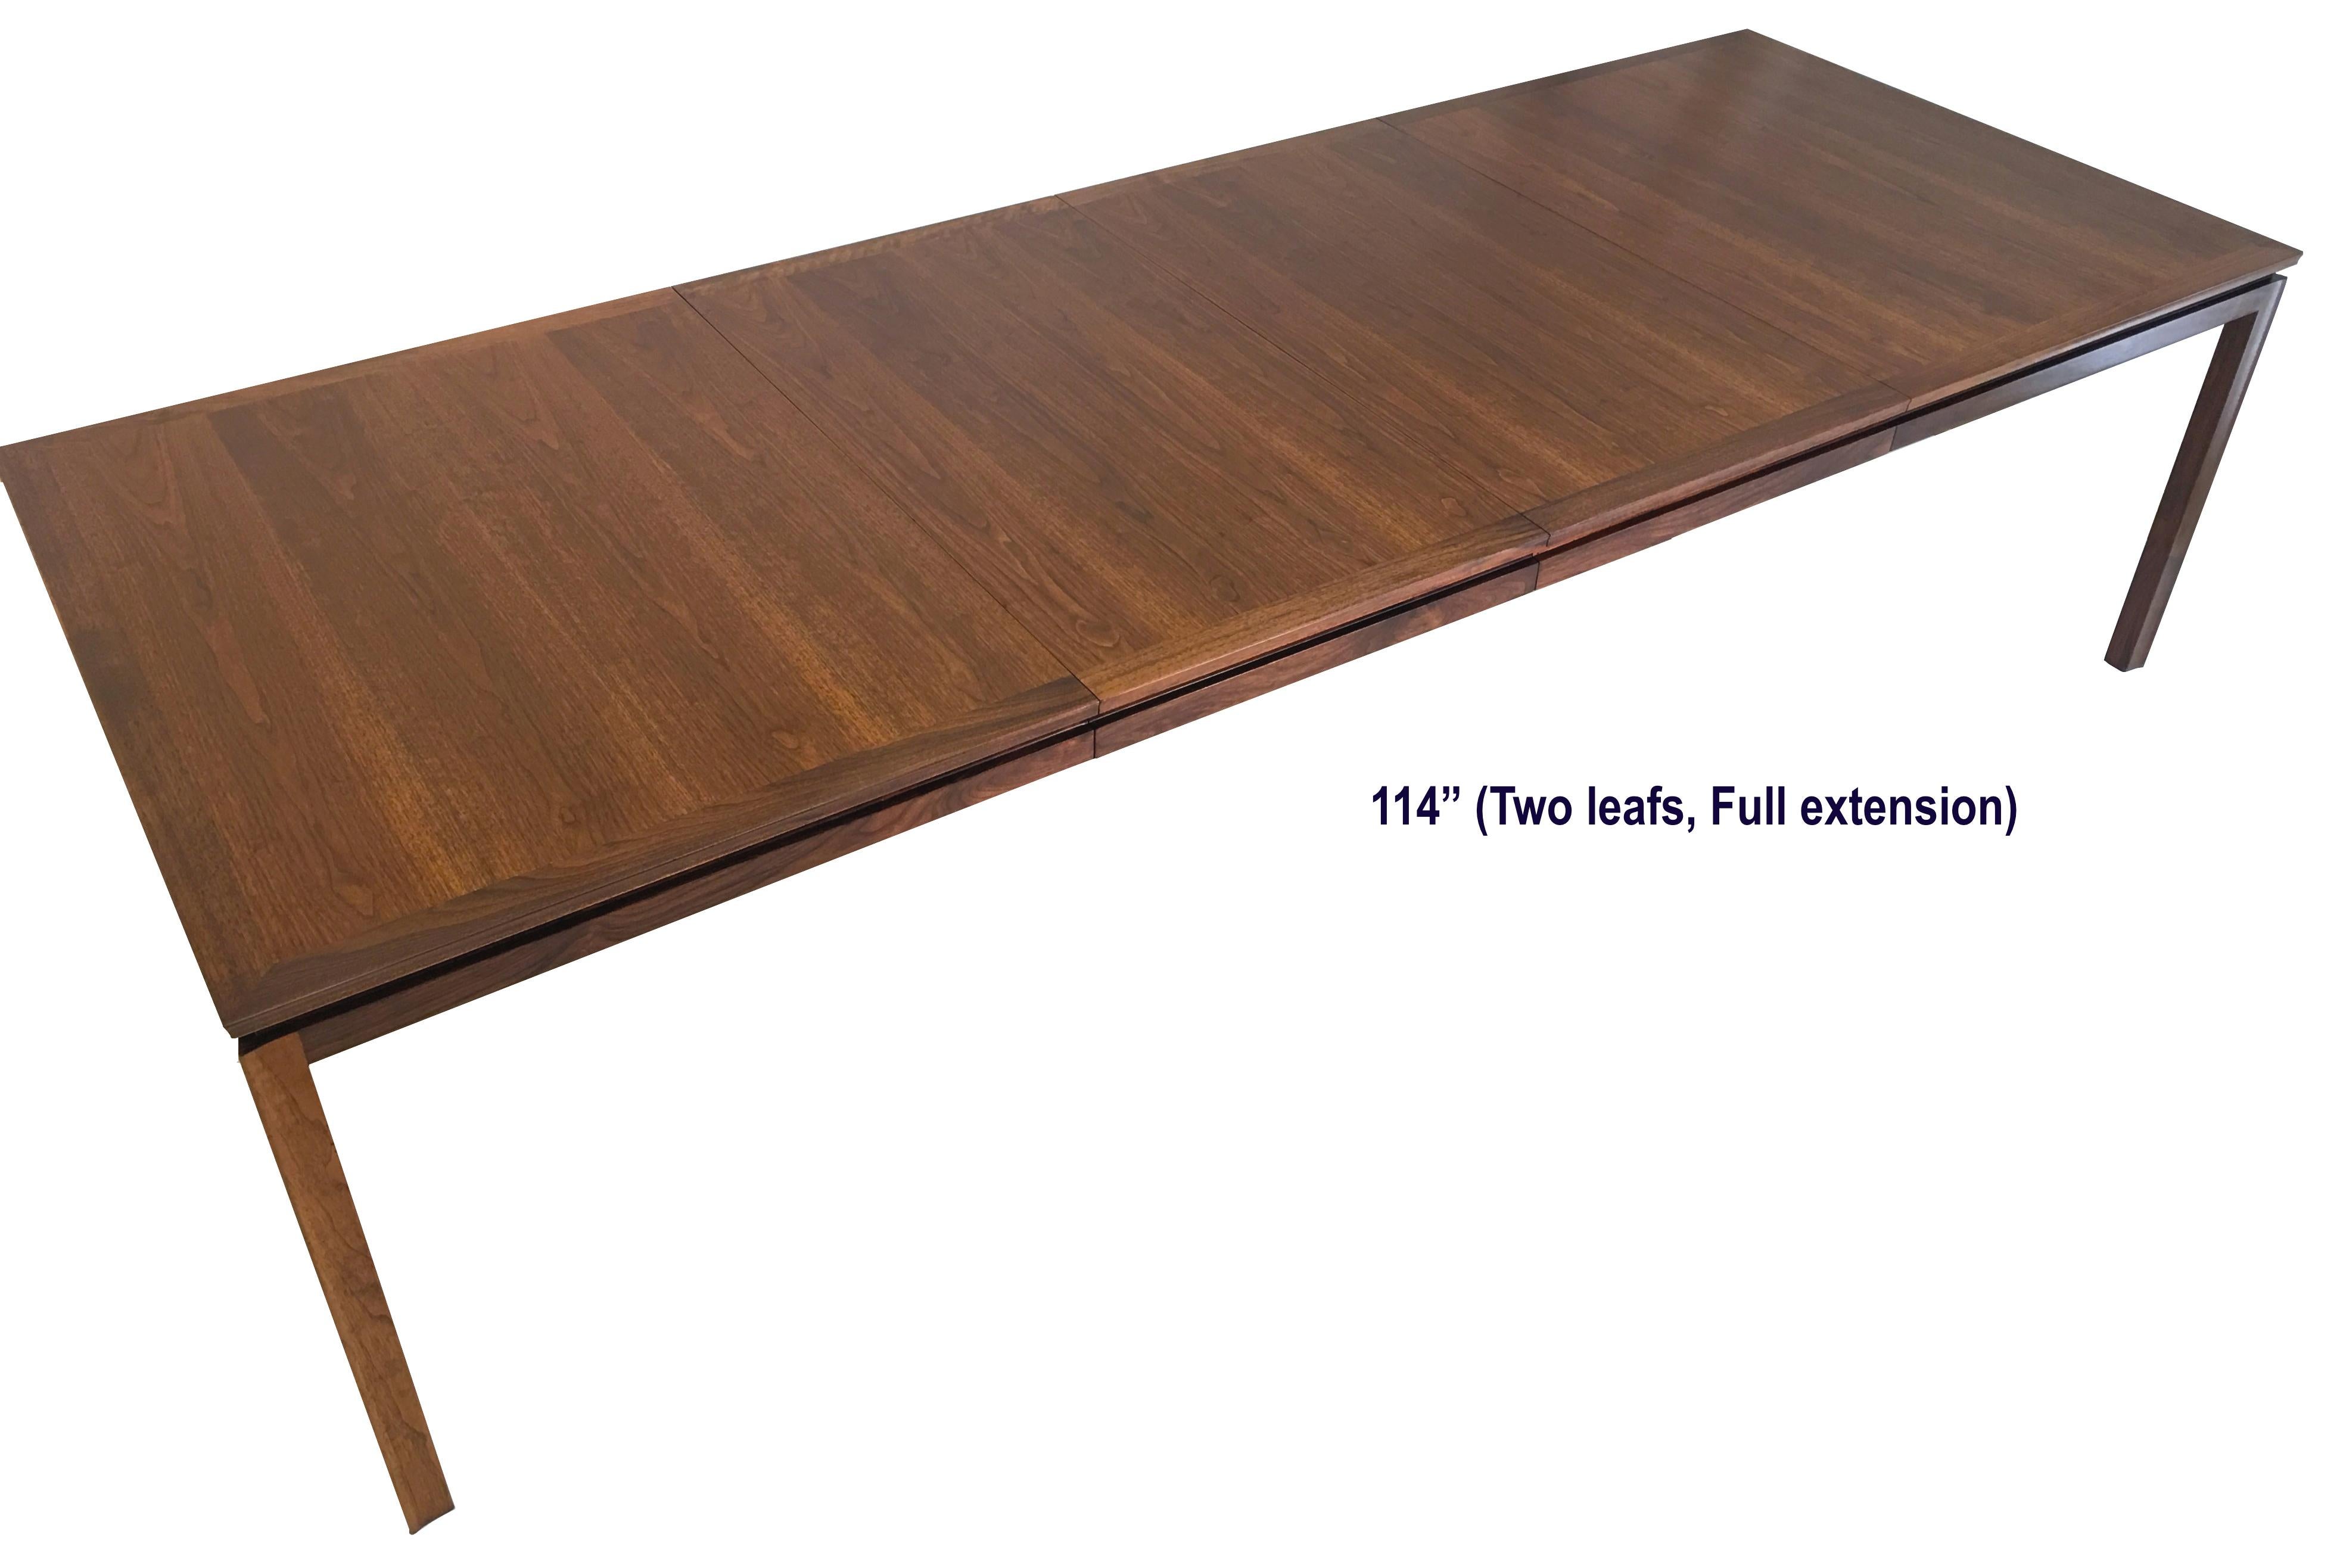 Complete Oiled Walnut Dining Table by Dunbar (amerikanisch)